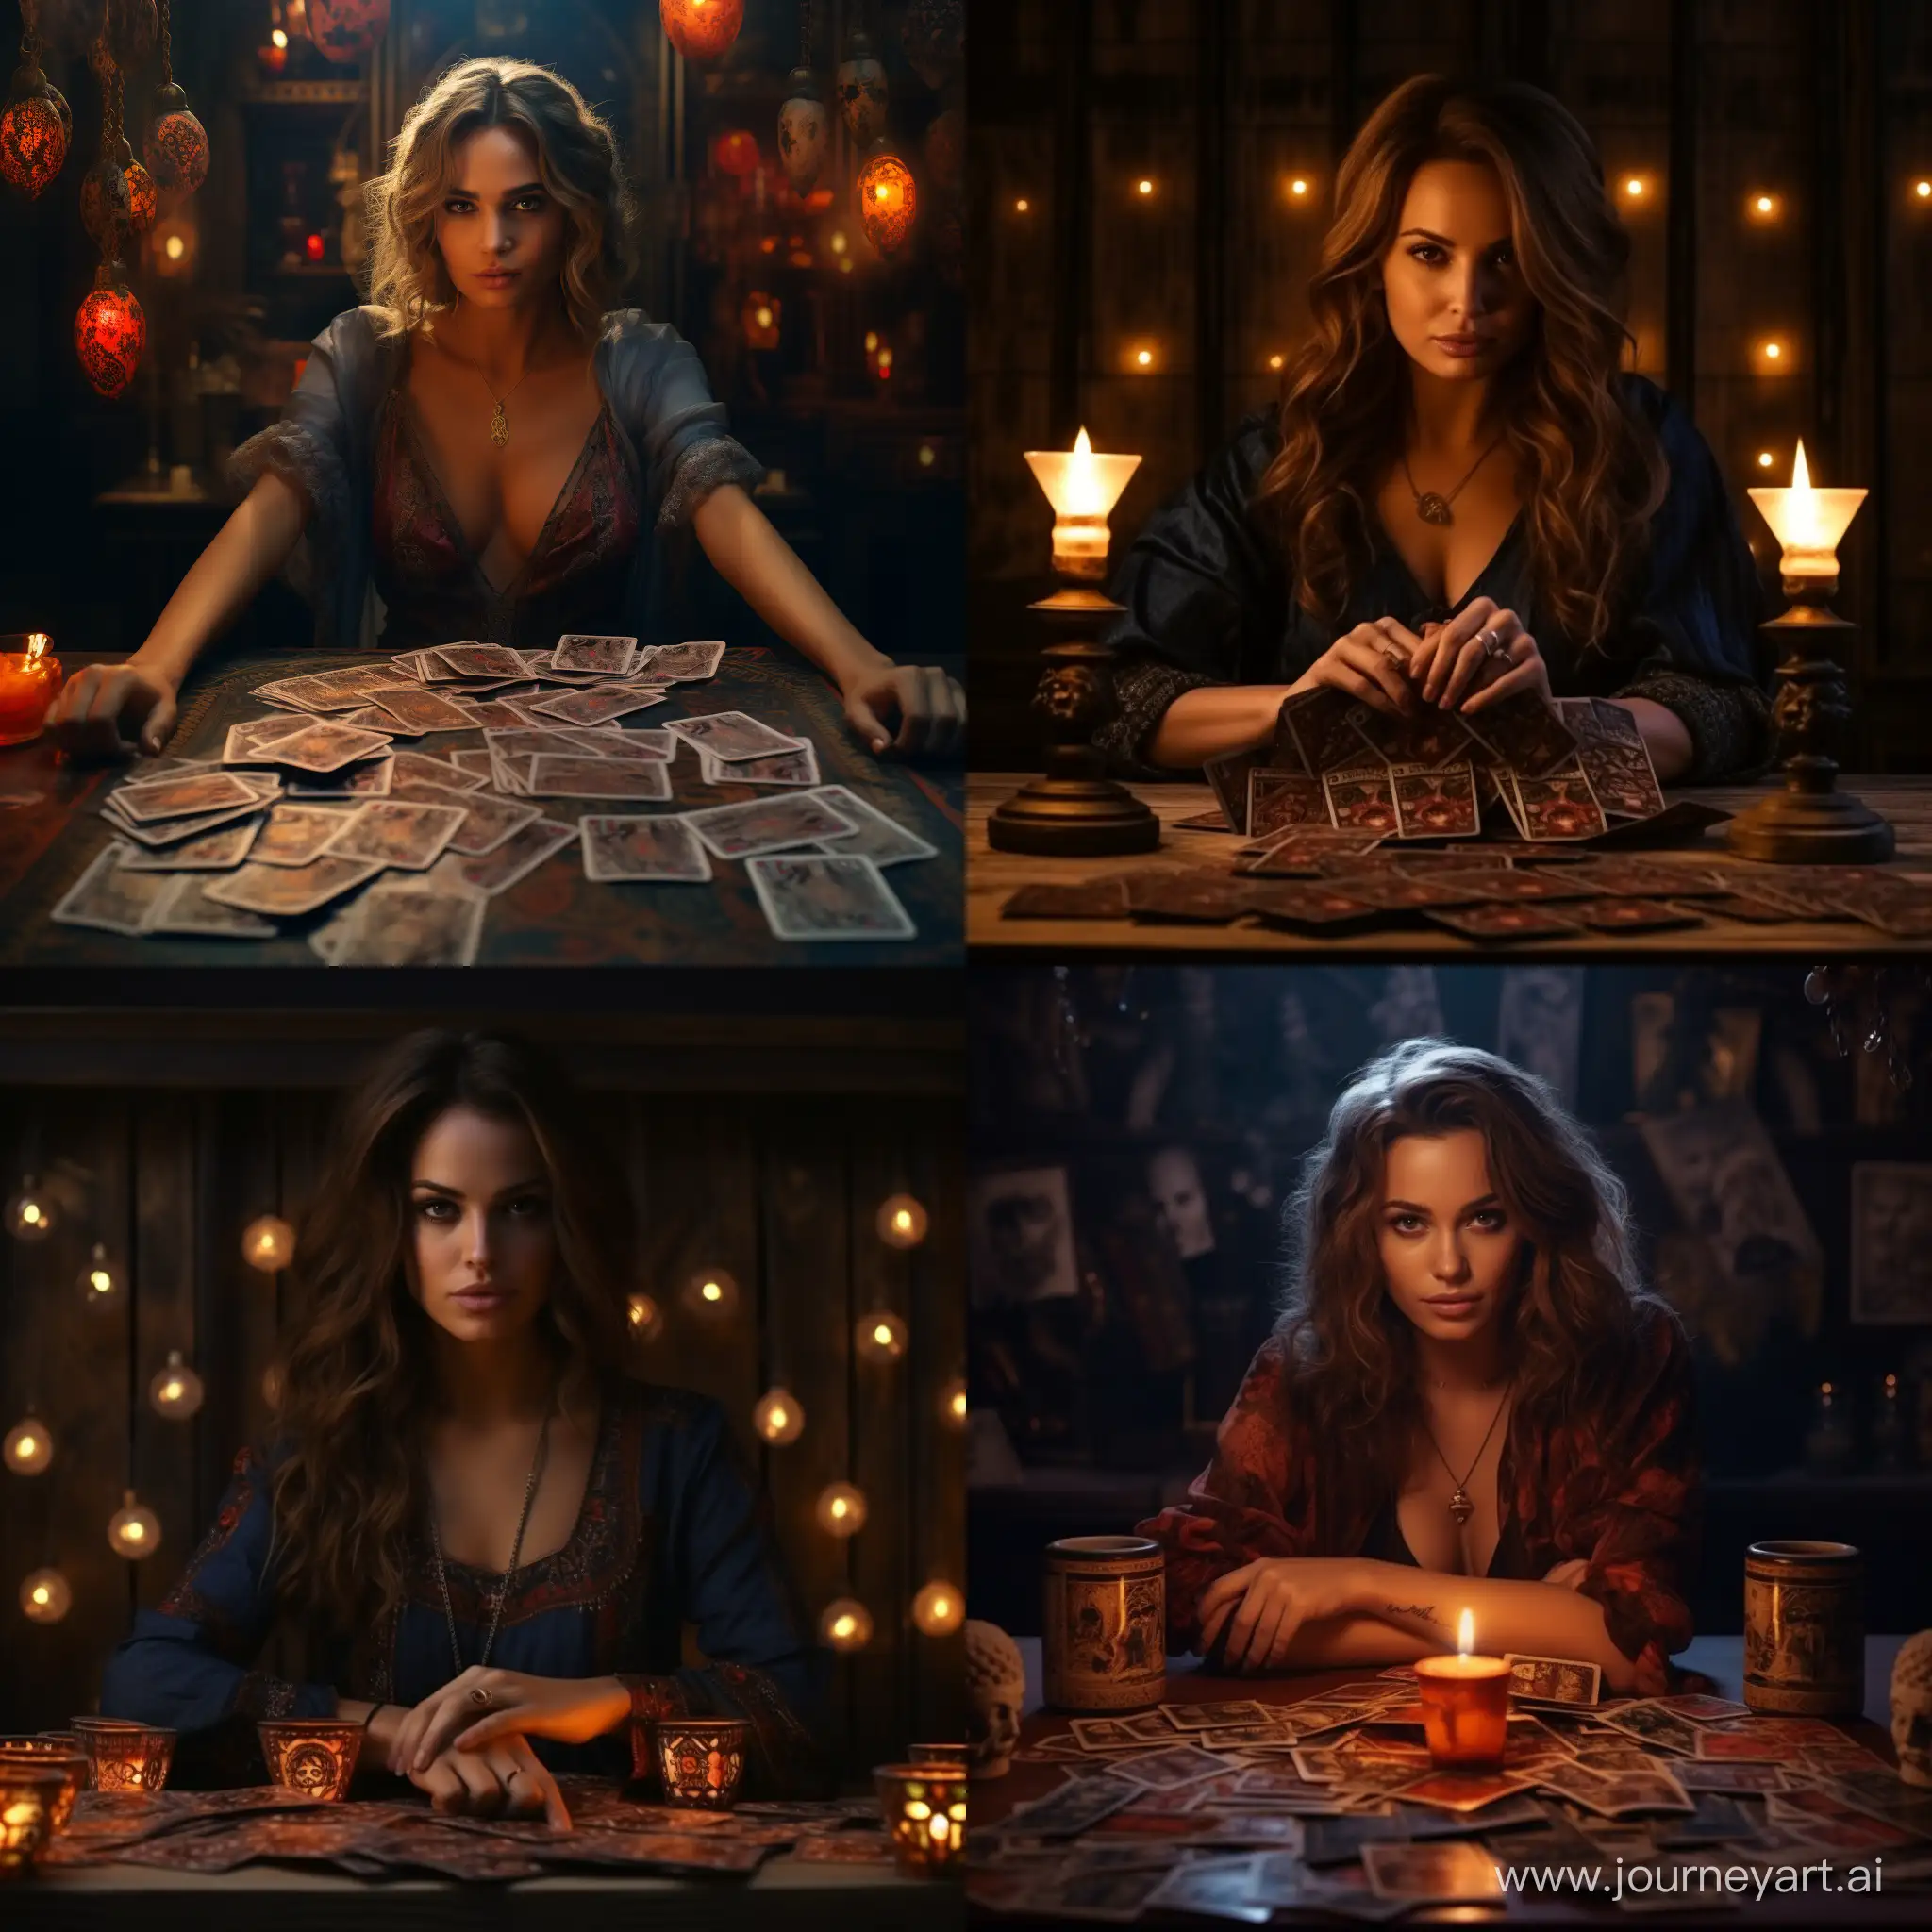 Russian woman, tarot reader, tarot cards, candles on the table, looking at the camera, hands lying on the table, 4k, high detail, warm lighting, dark colors